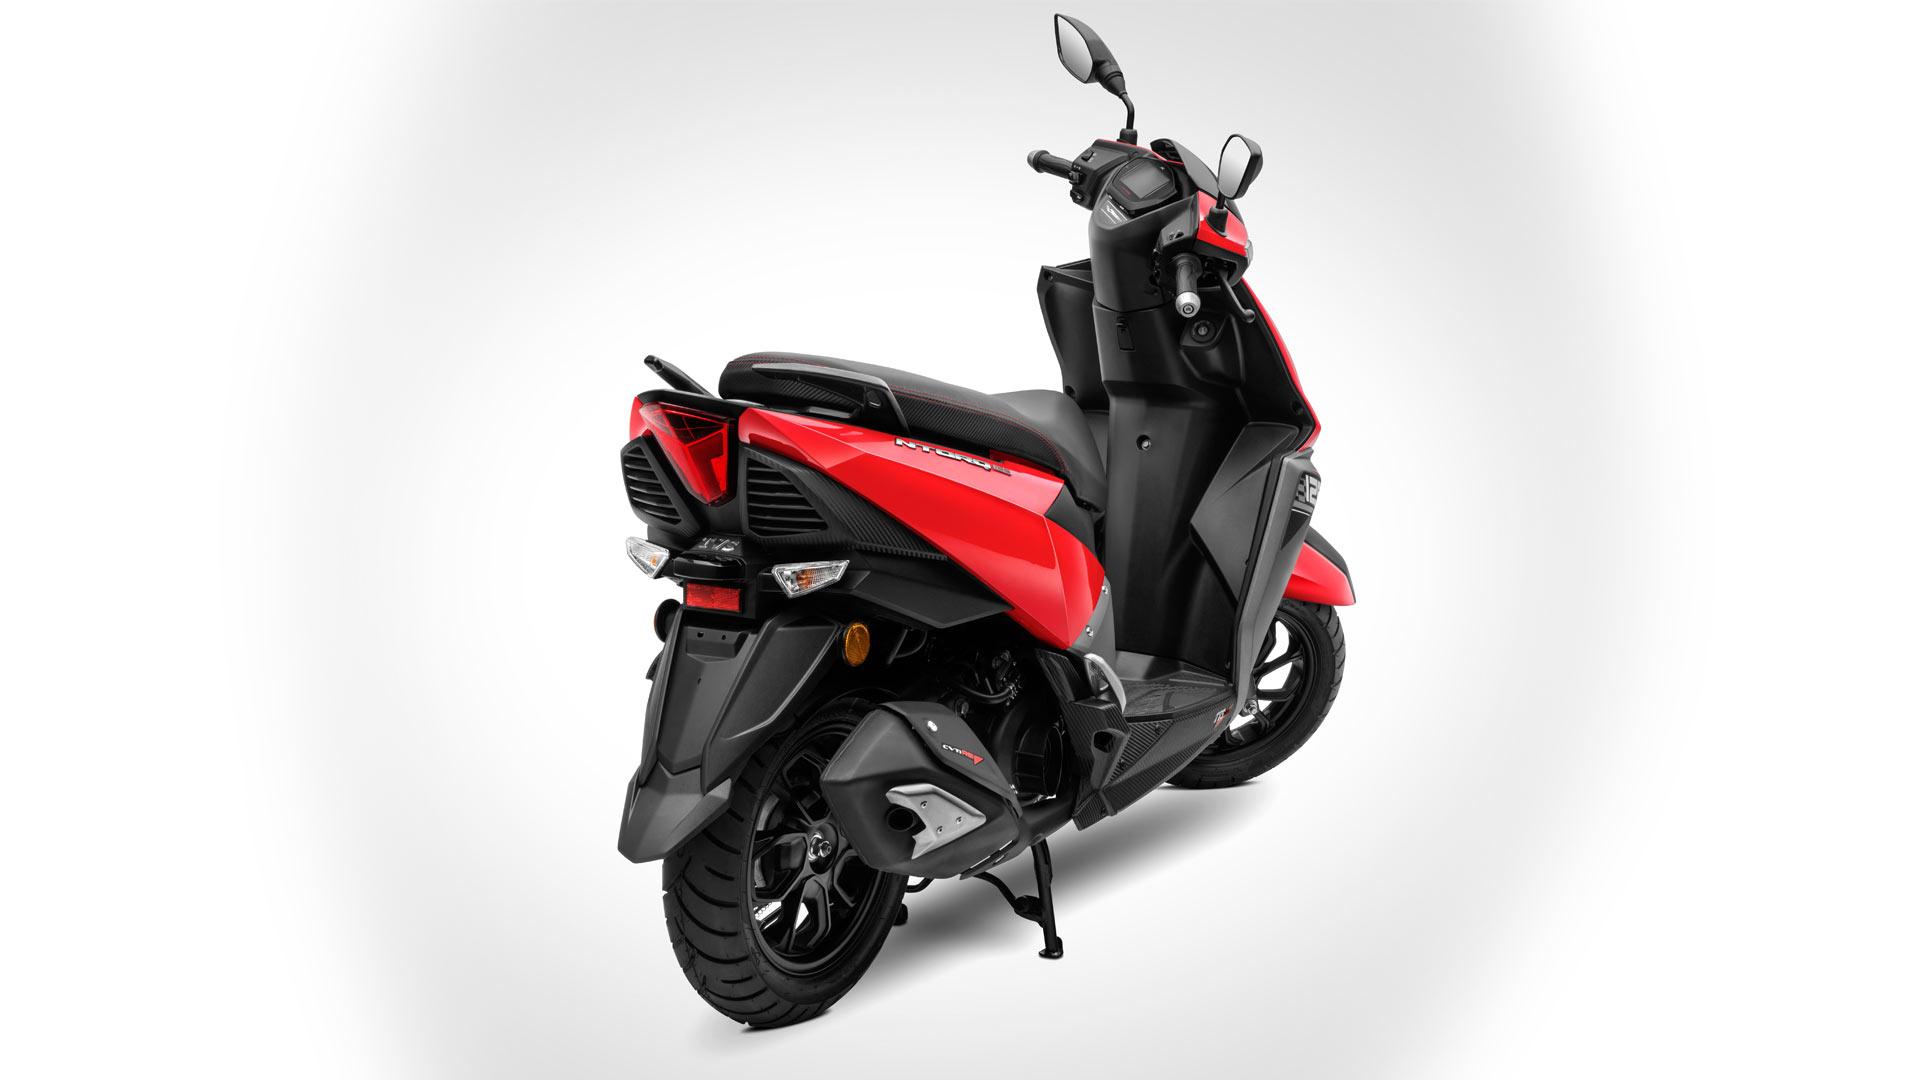 TVS Ntorq 125 crosses 1 lakh sales, now available in Metallic Red